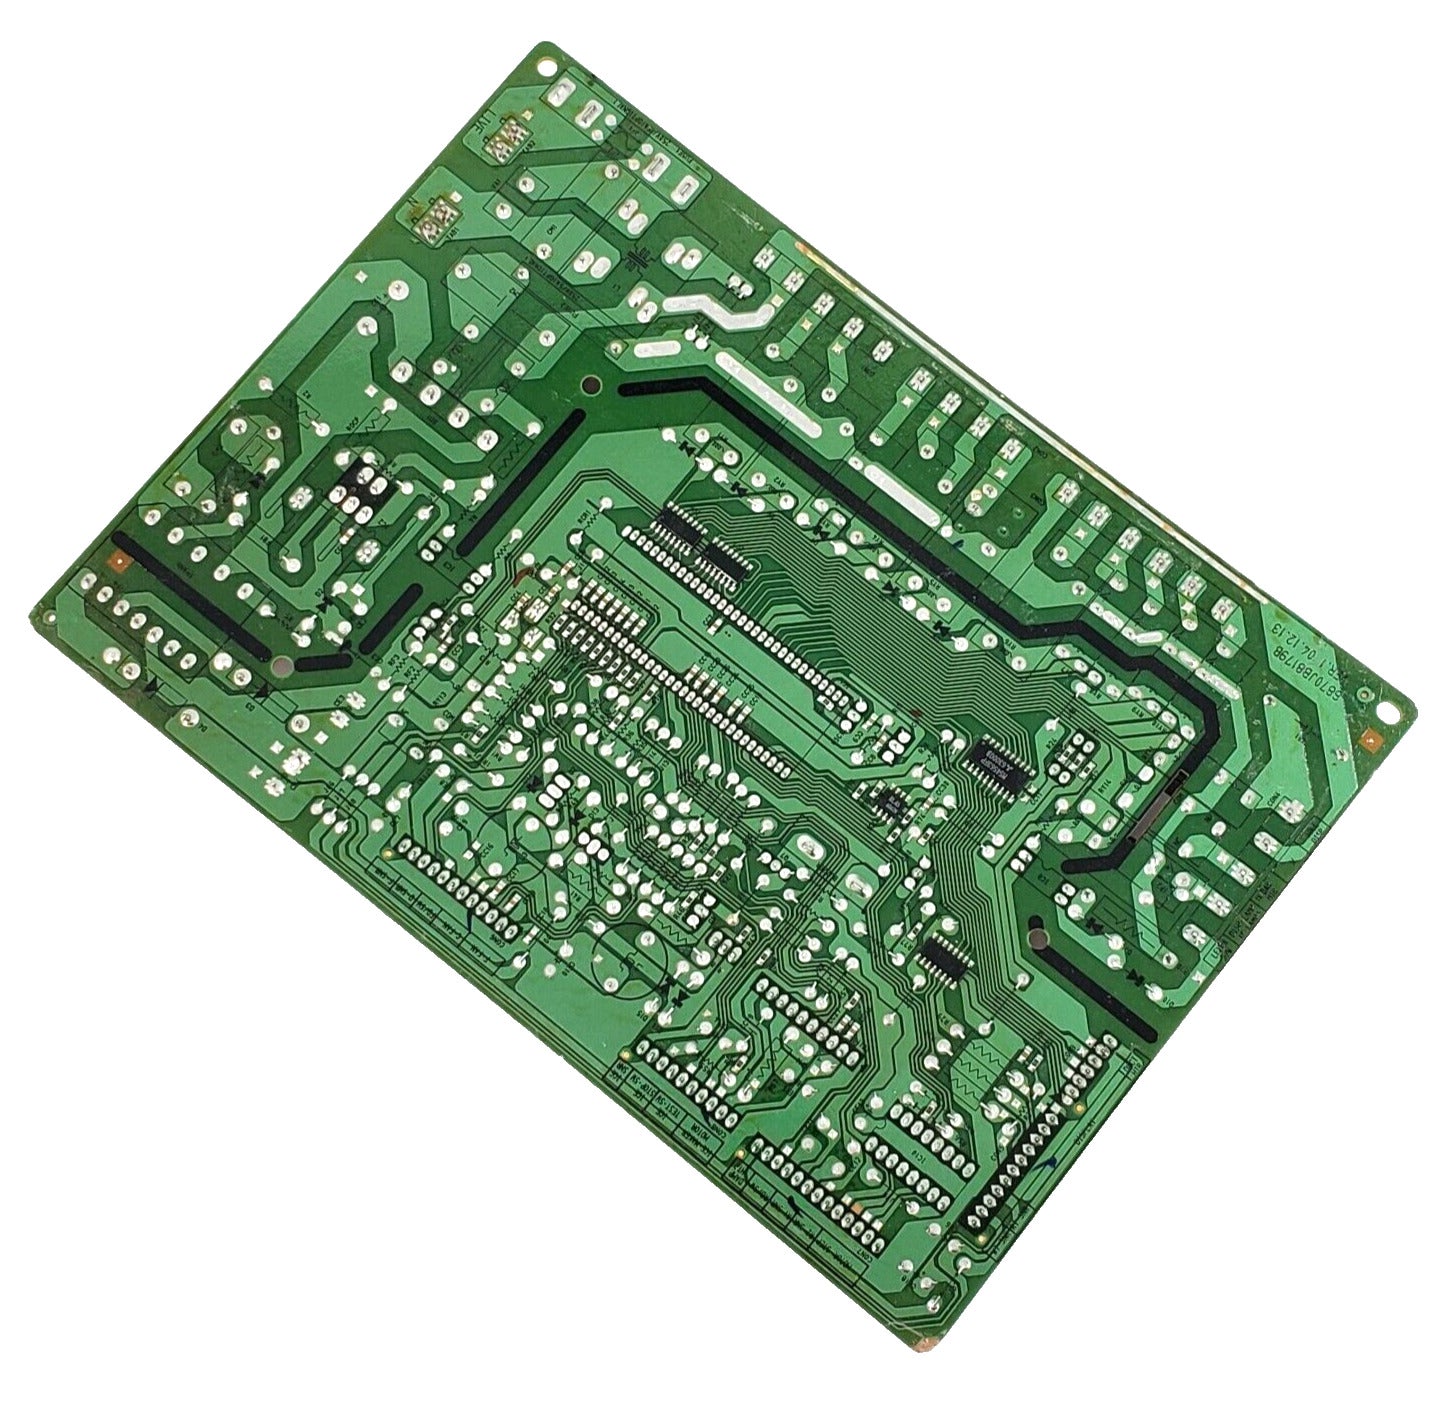 OEM Replacement for LG Refrigerator Control Board 6871JB1410D